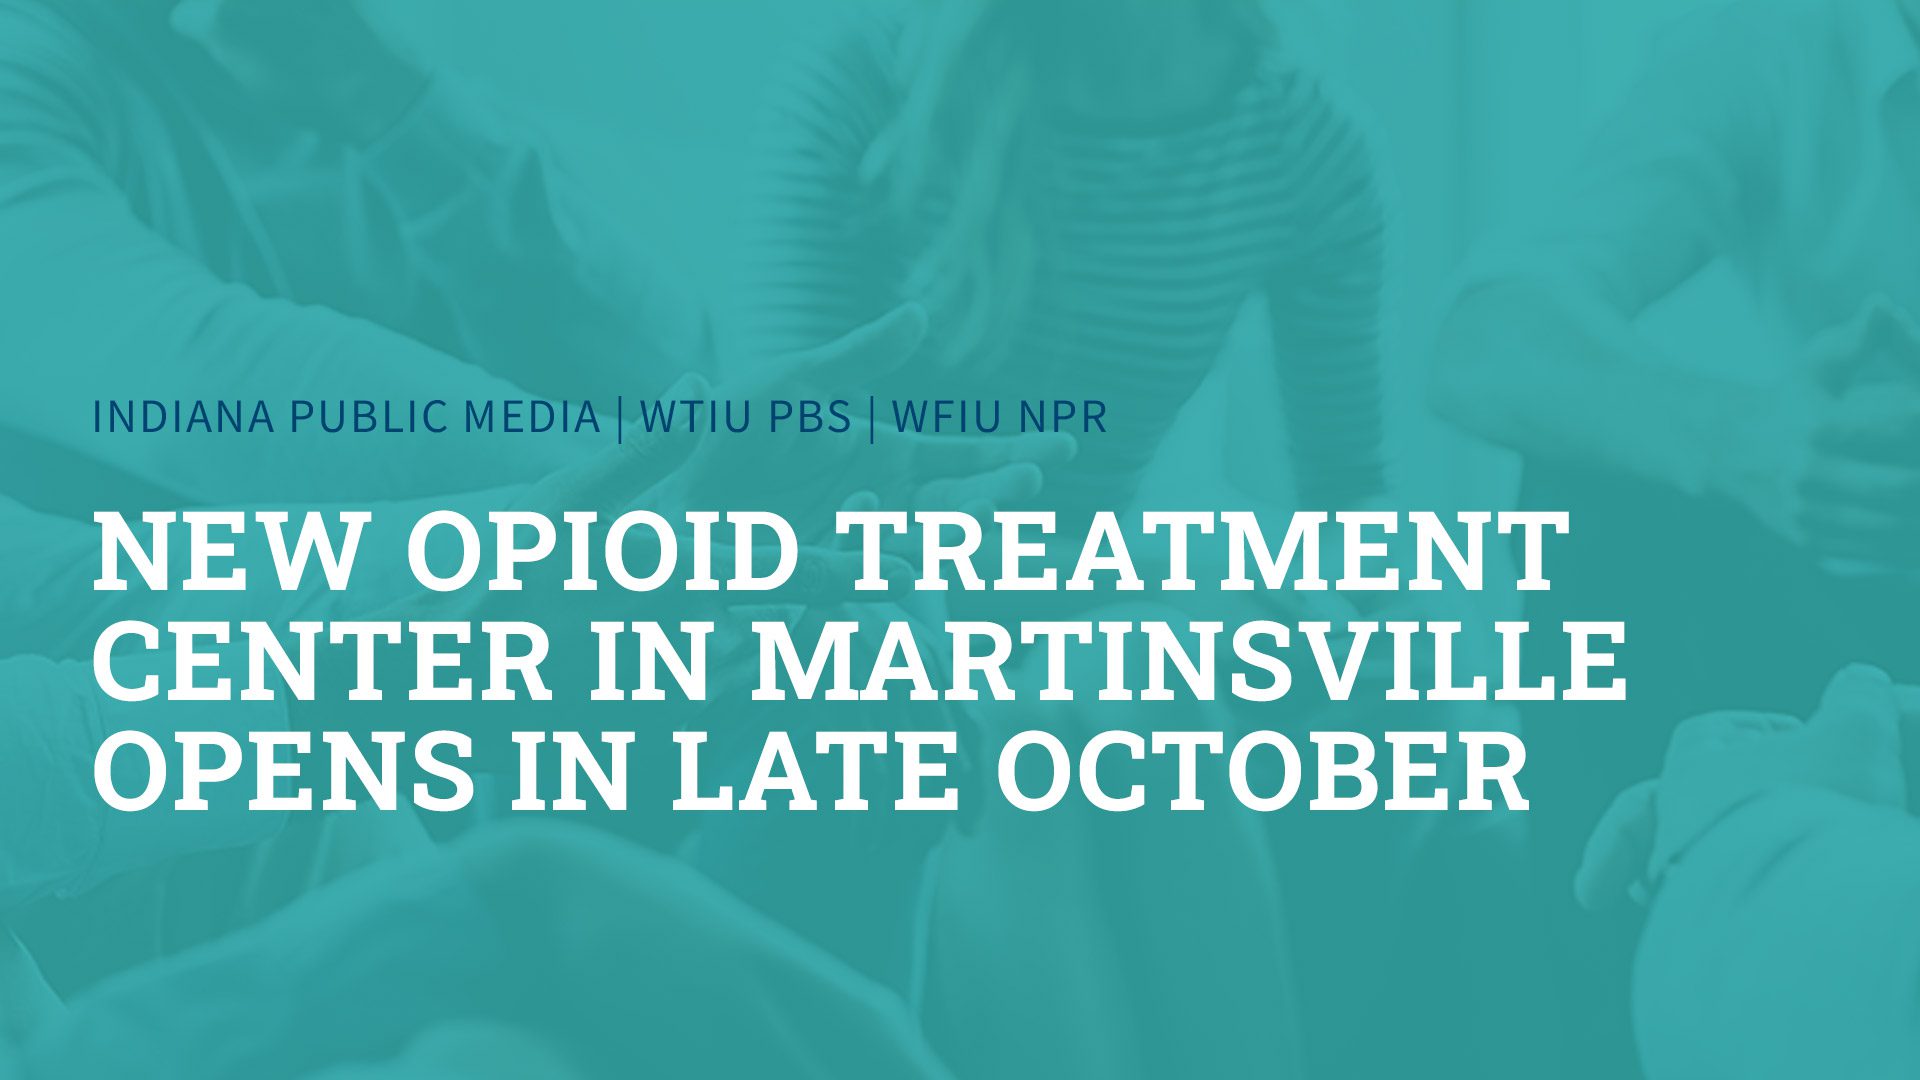 New opioid treatment center in Martinsville opens in late October